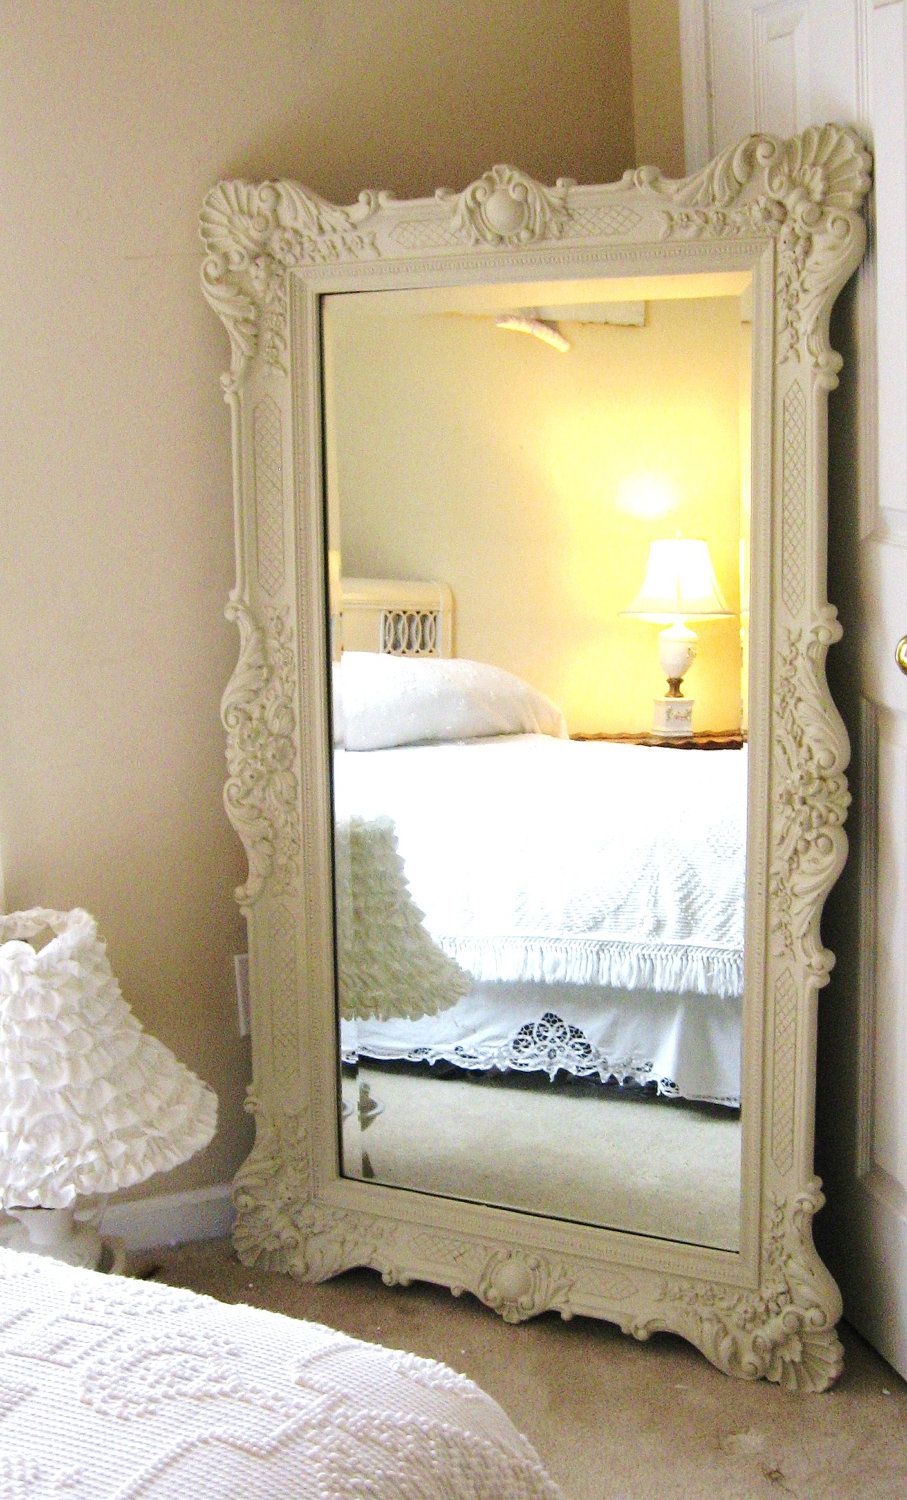 Vintage oversized mirrors!! WANT!